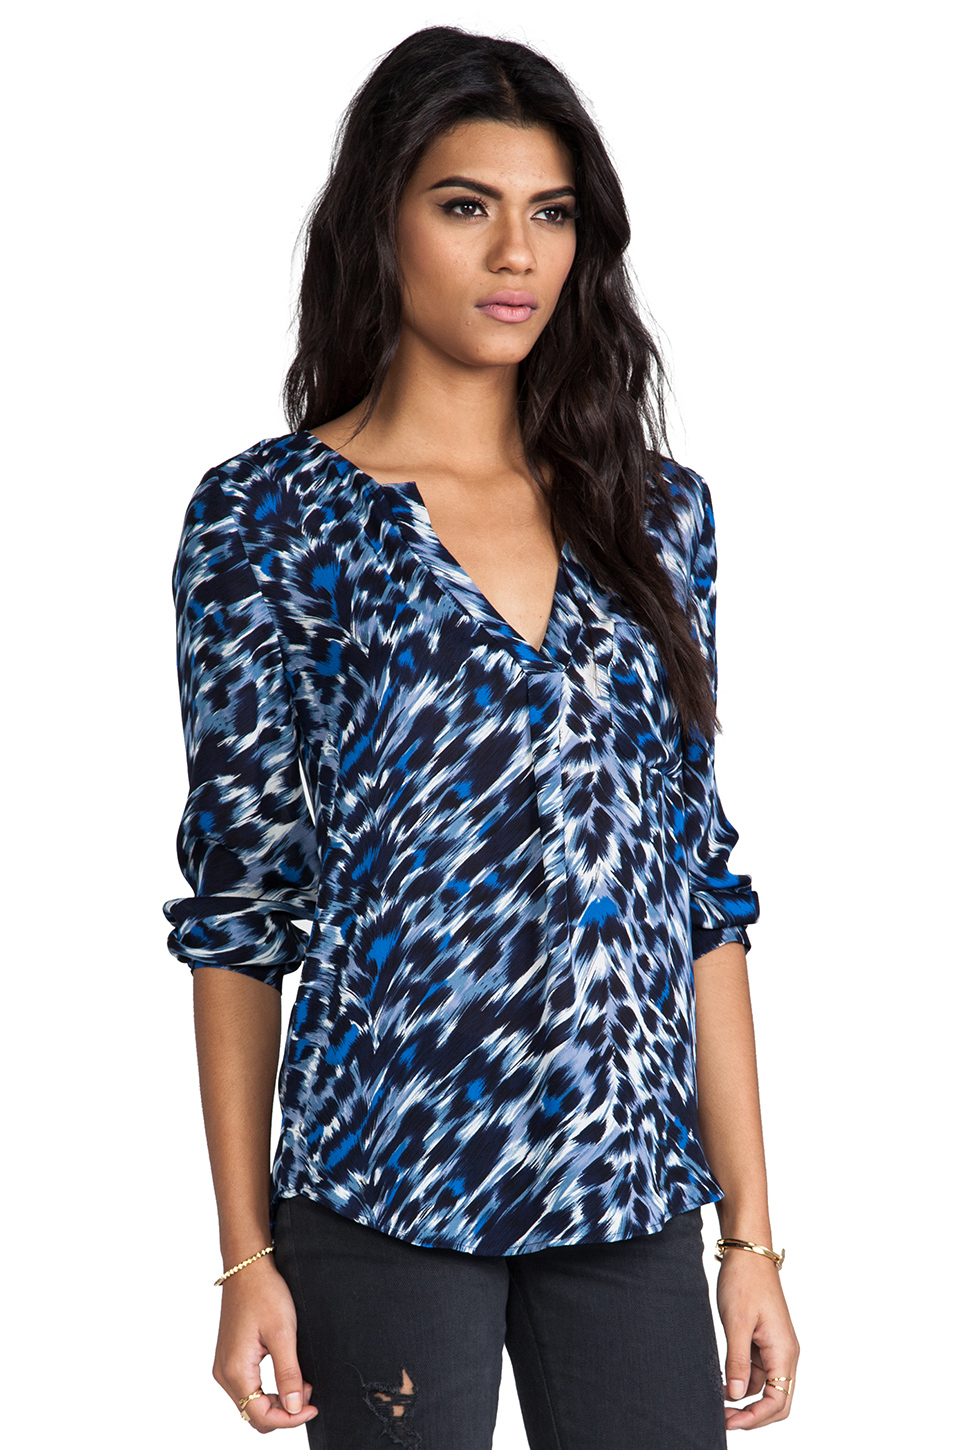 Lyst - Joie Deon Animal Print Blouse in Blue